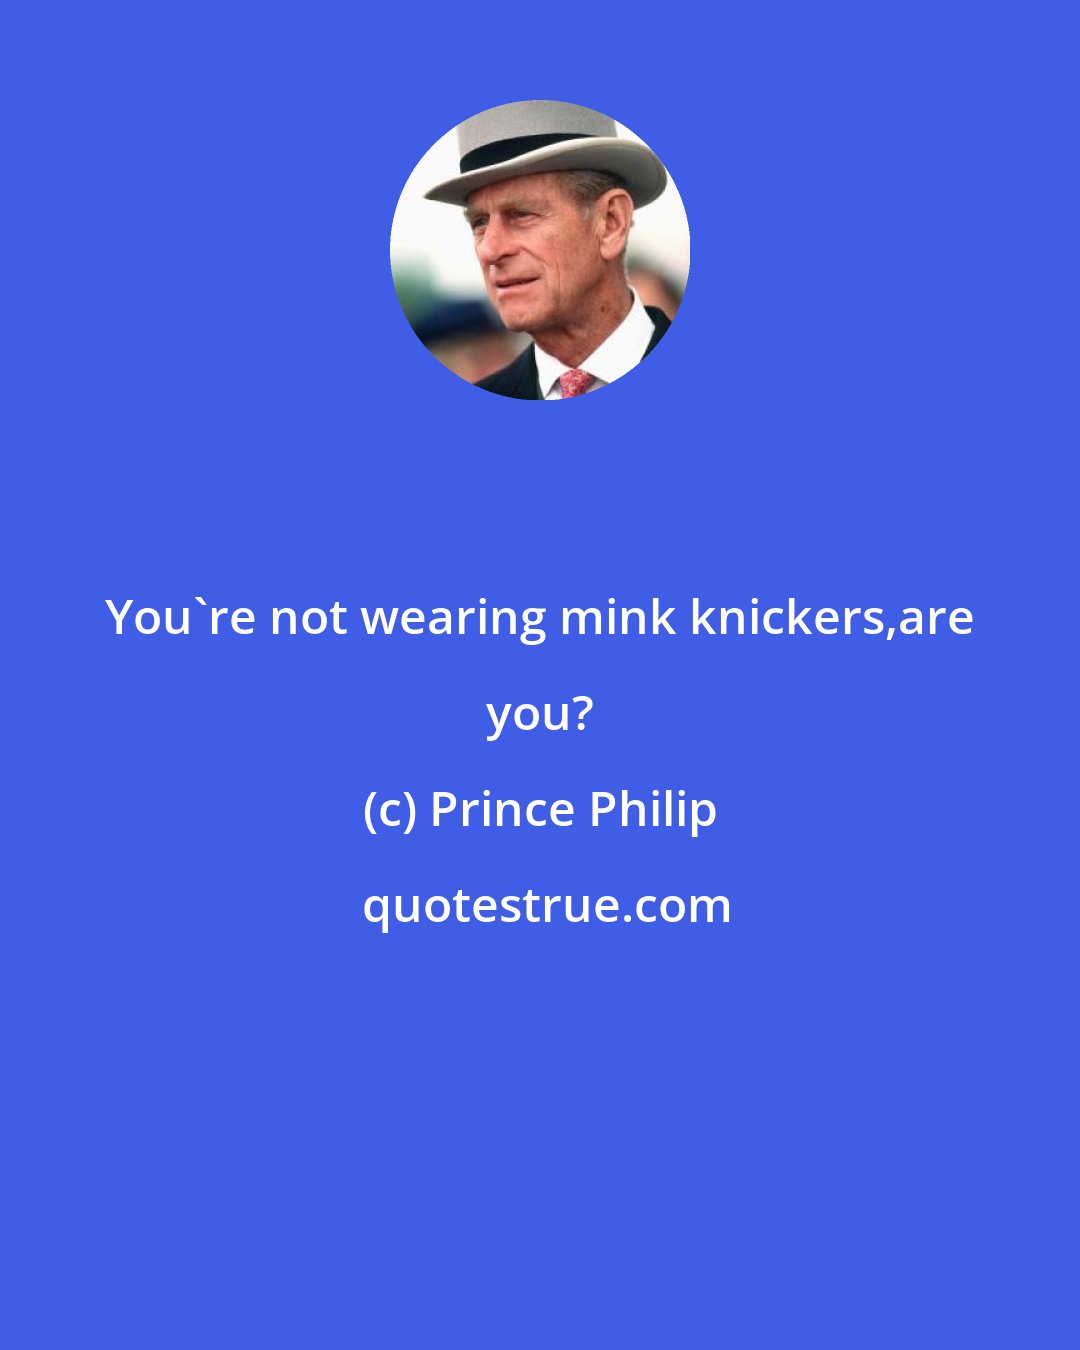 Prince Philip: You're not wearing mink knickers,are you?